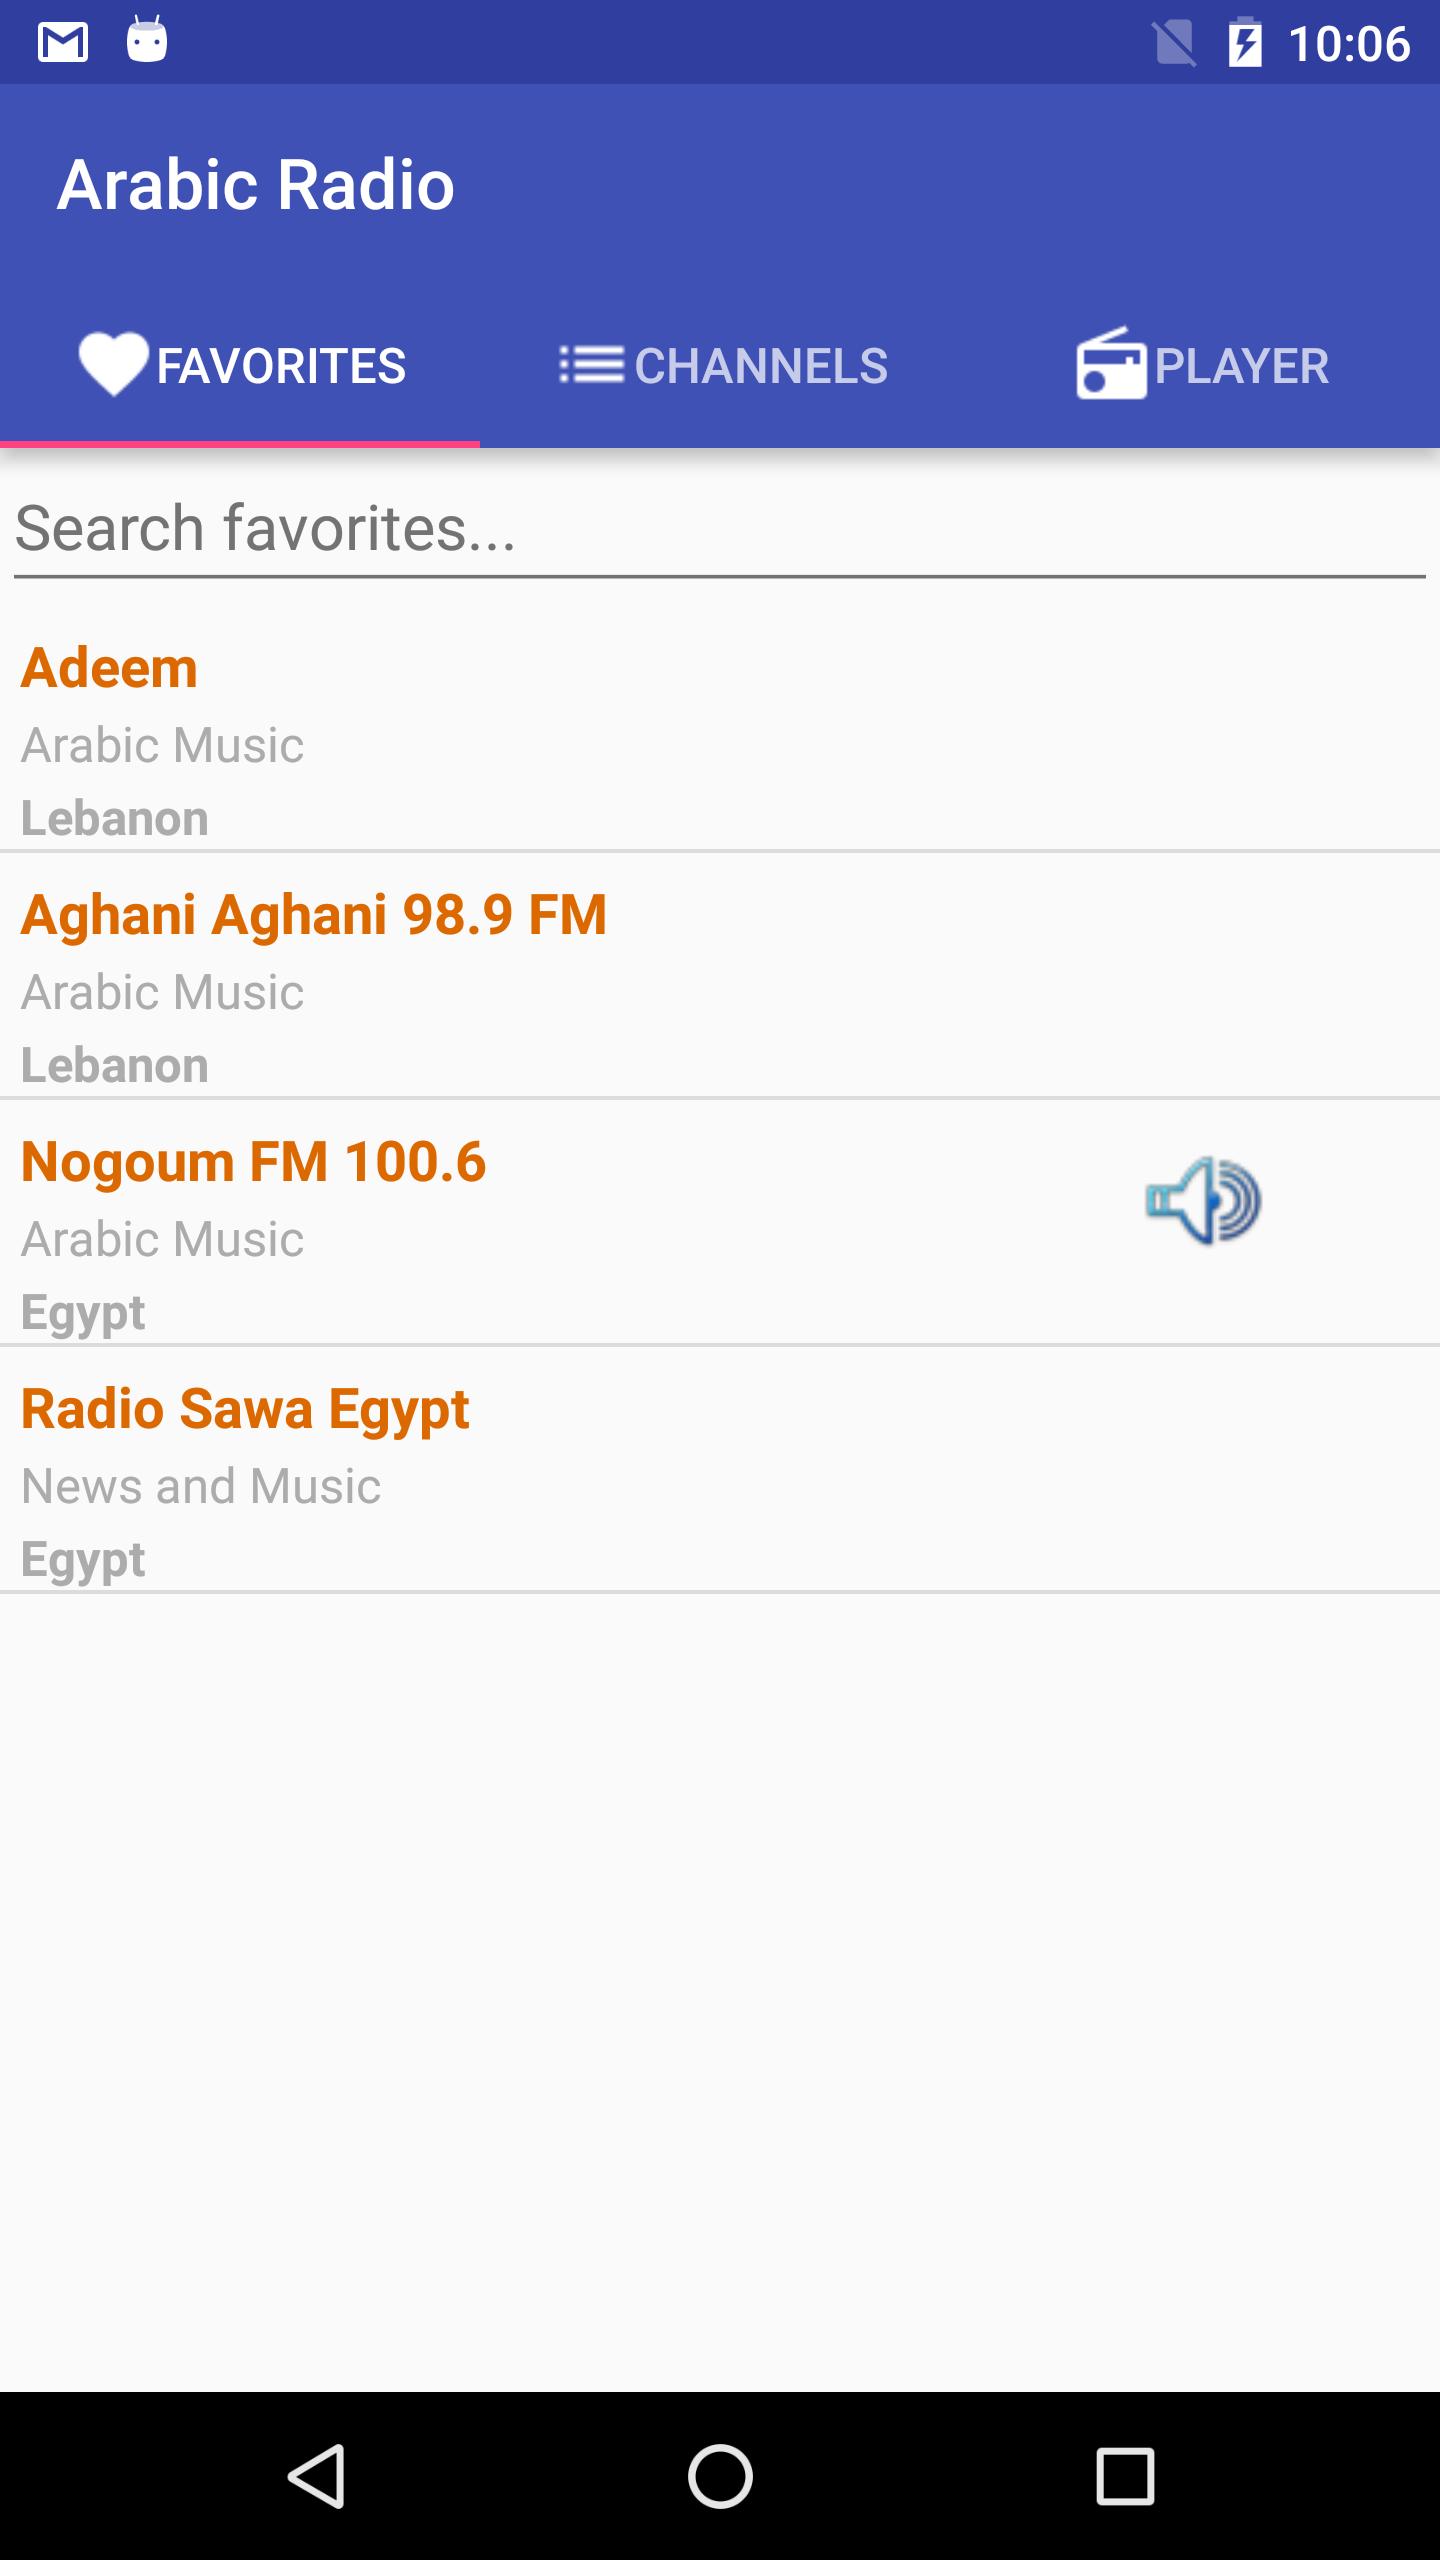 Arabic Radio for Android - APK Download